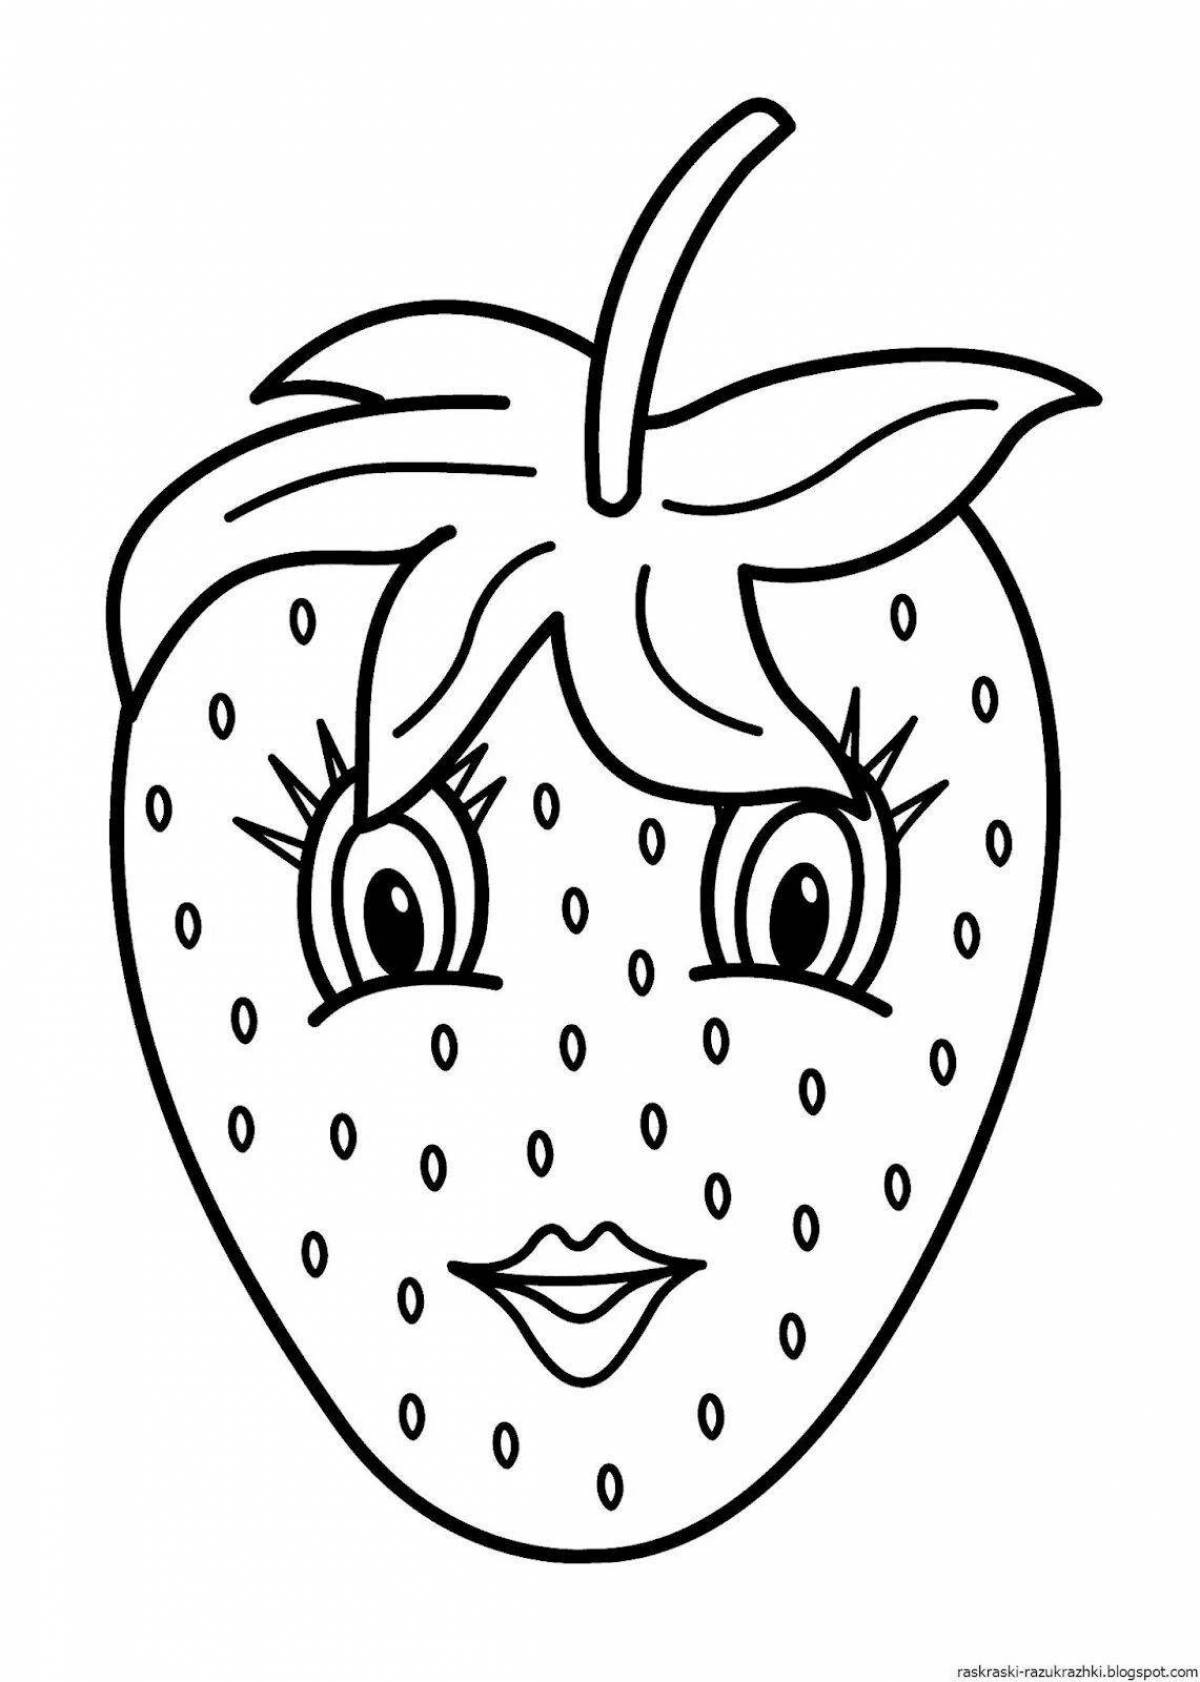 Funny strawberry coloring book for children 5-6 years old